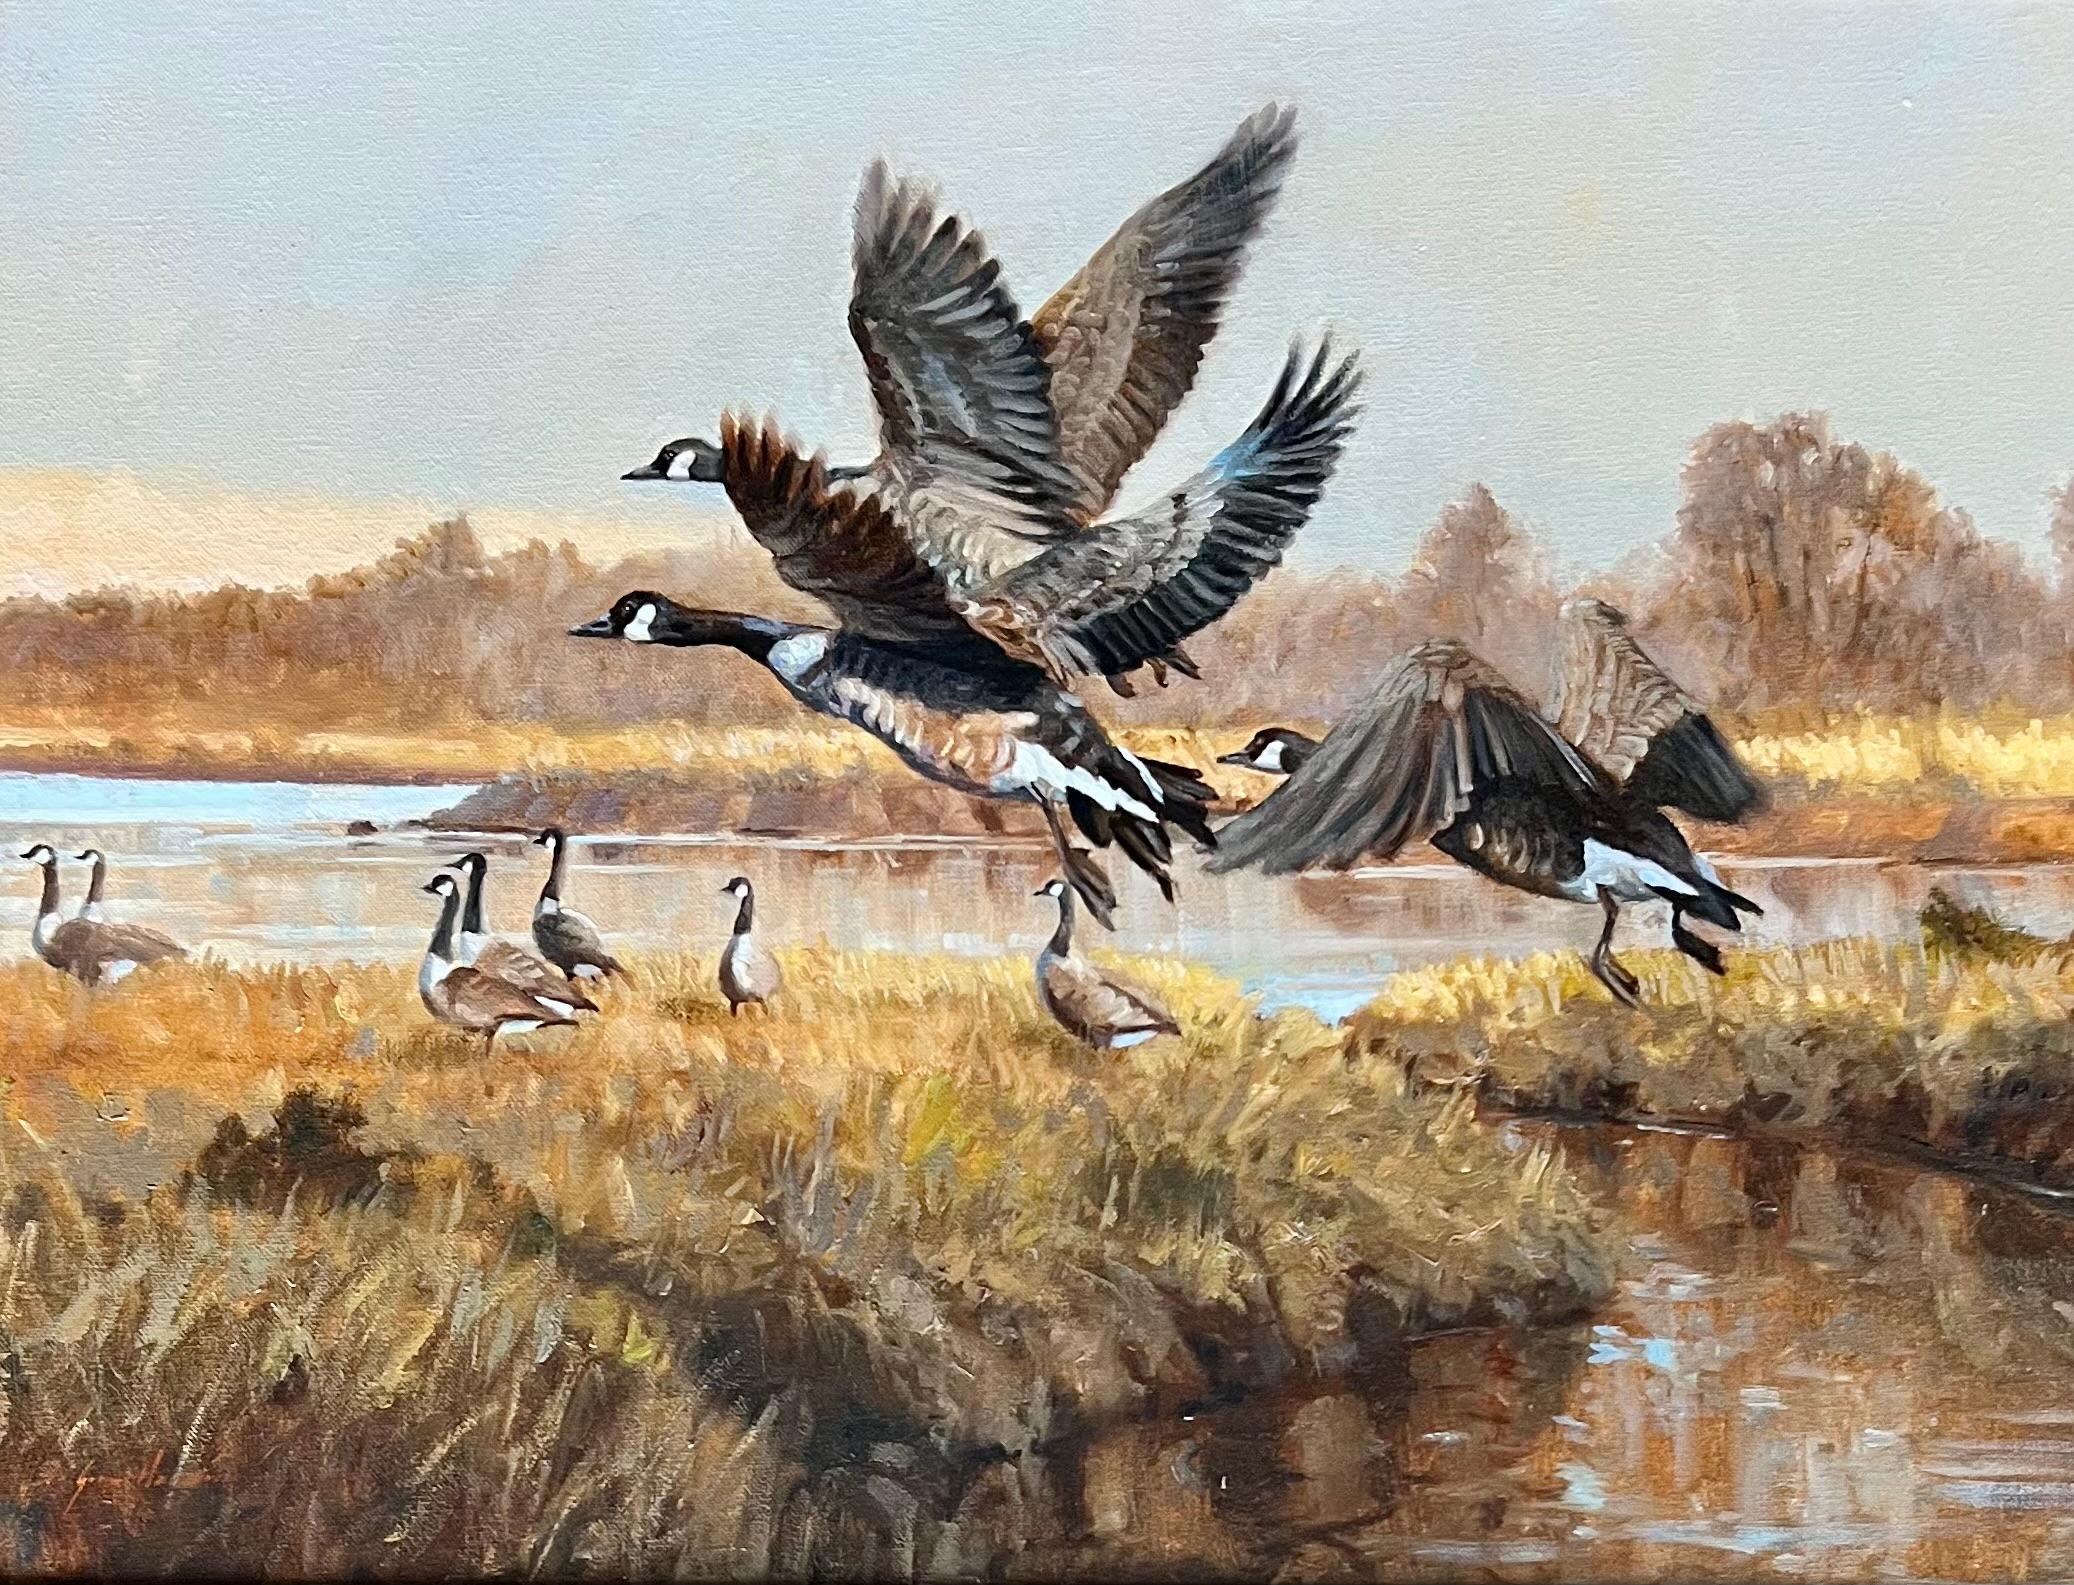 Rhythm of Wings - Painting by Grant Hacking